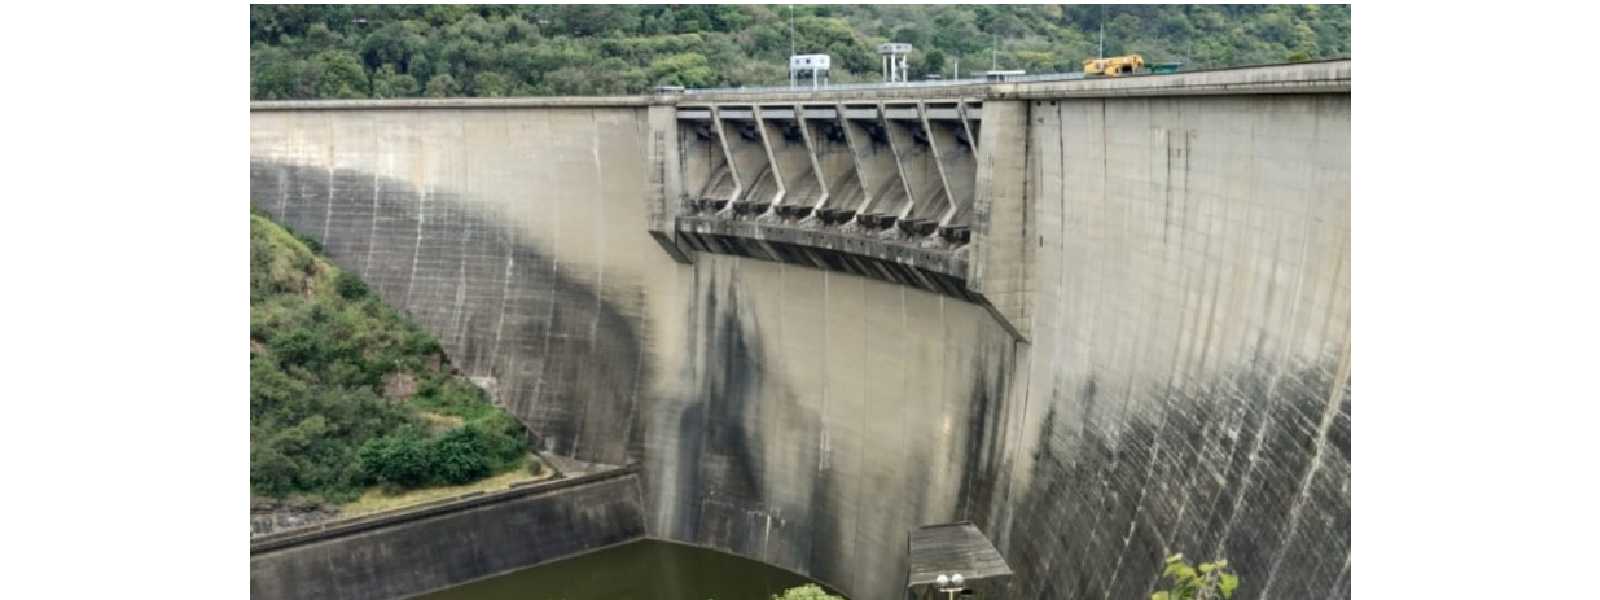 Low water levels in reservoirs reported